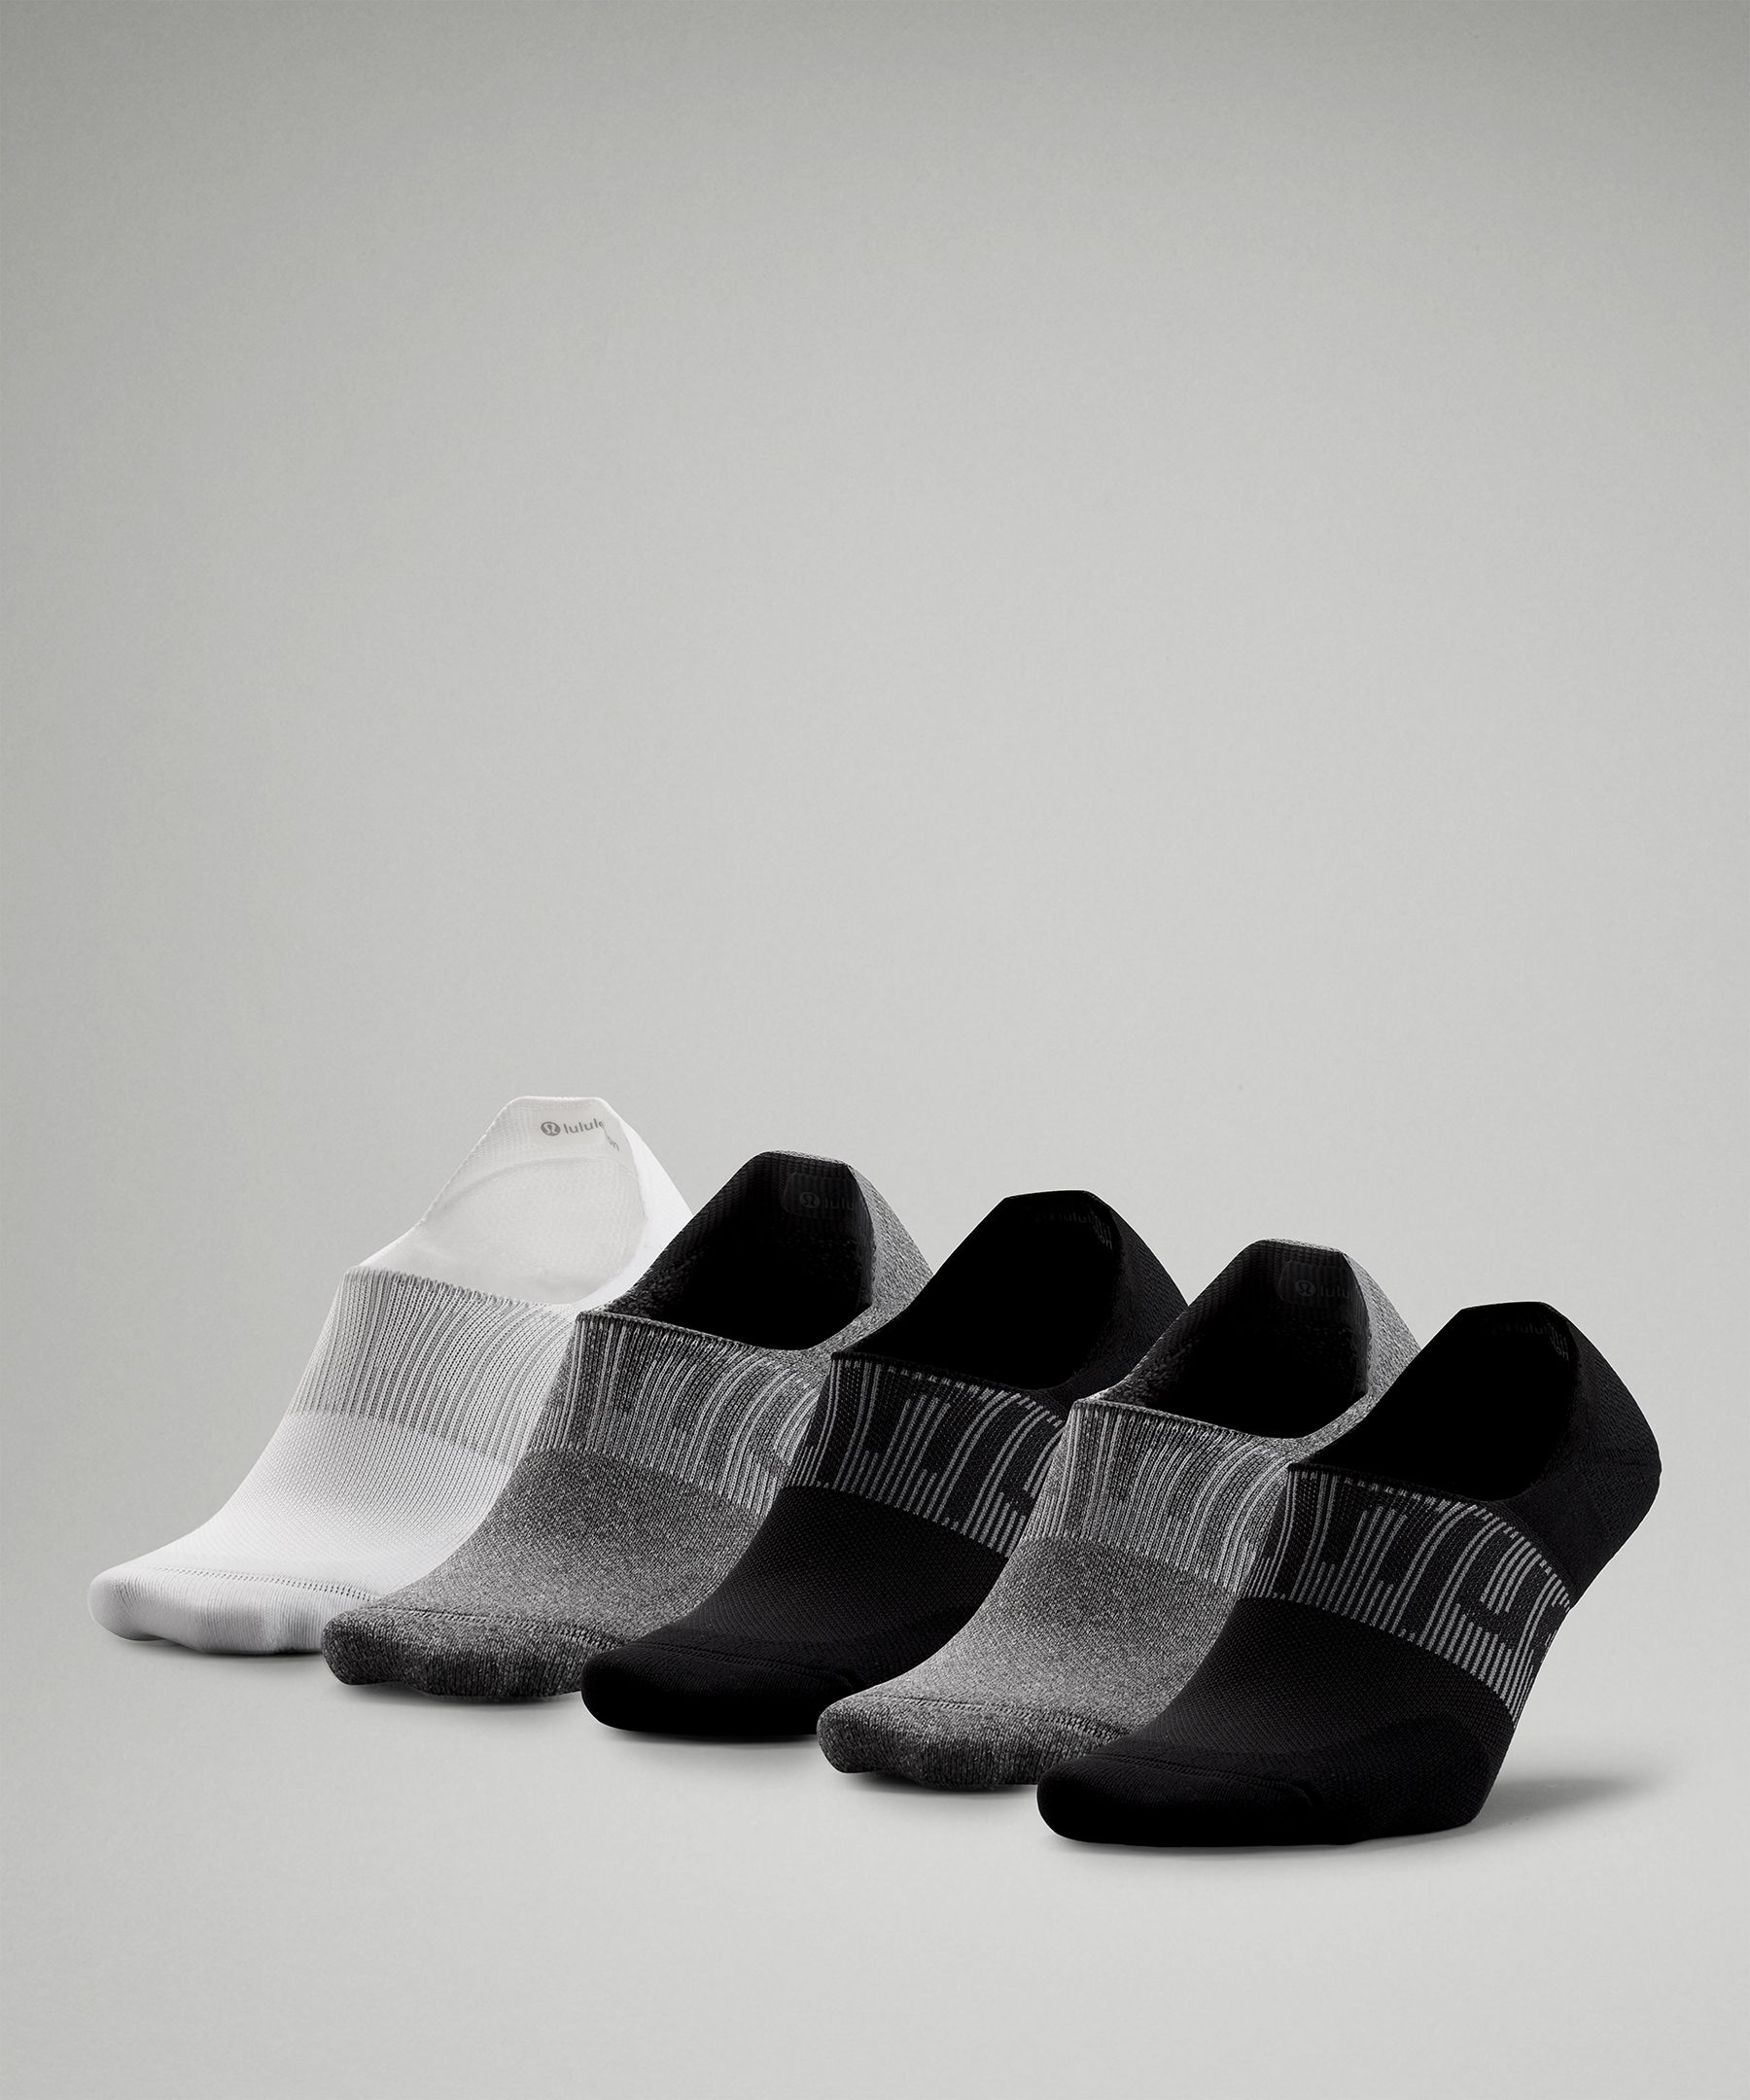 Lululemon Power Stride No-show Socks With Active Grip 5 Pack